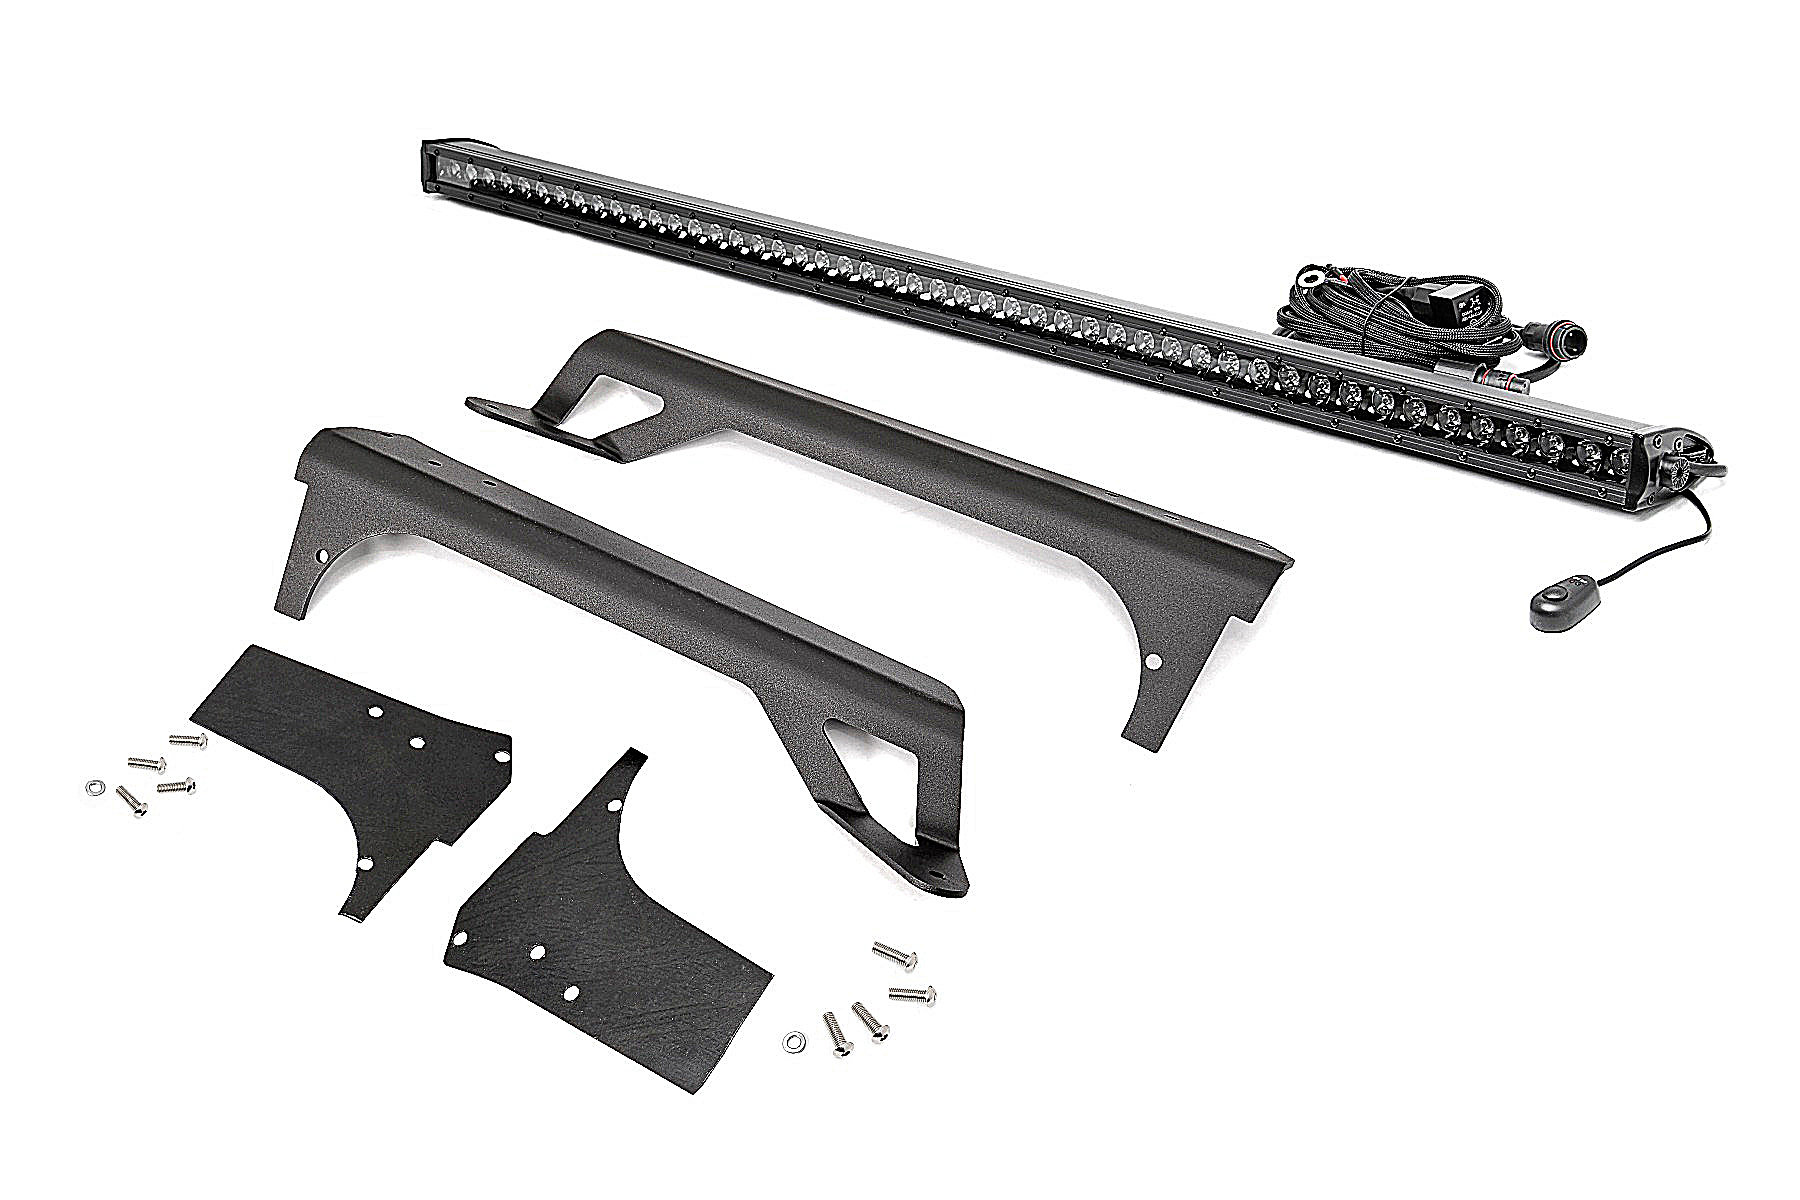 Rough Country 50-Inch Straight LED Light Bar Upper Windshield Mount Kit for  97-06 Jeep Wrangler TJ  Unlimited Quadratec